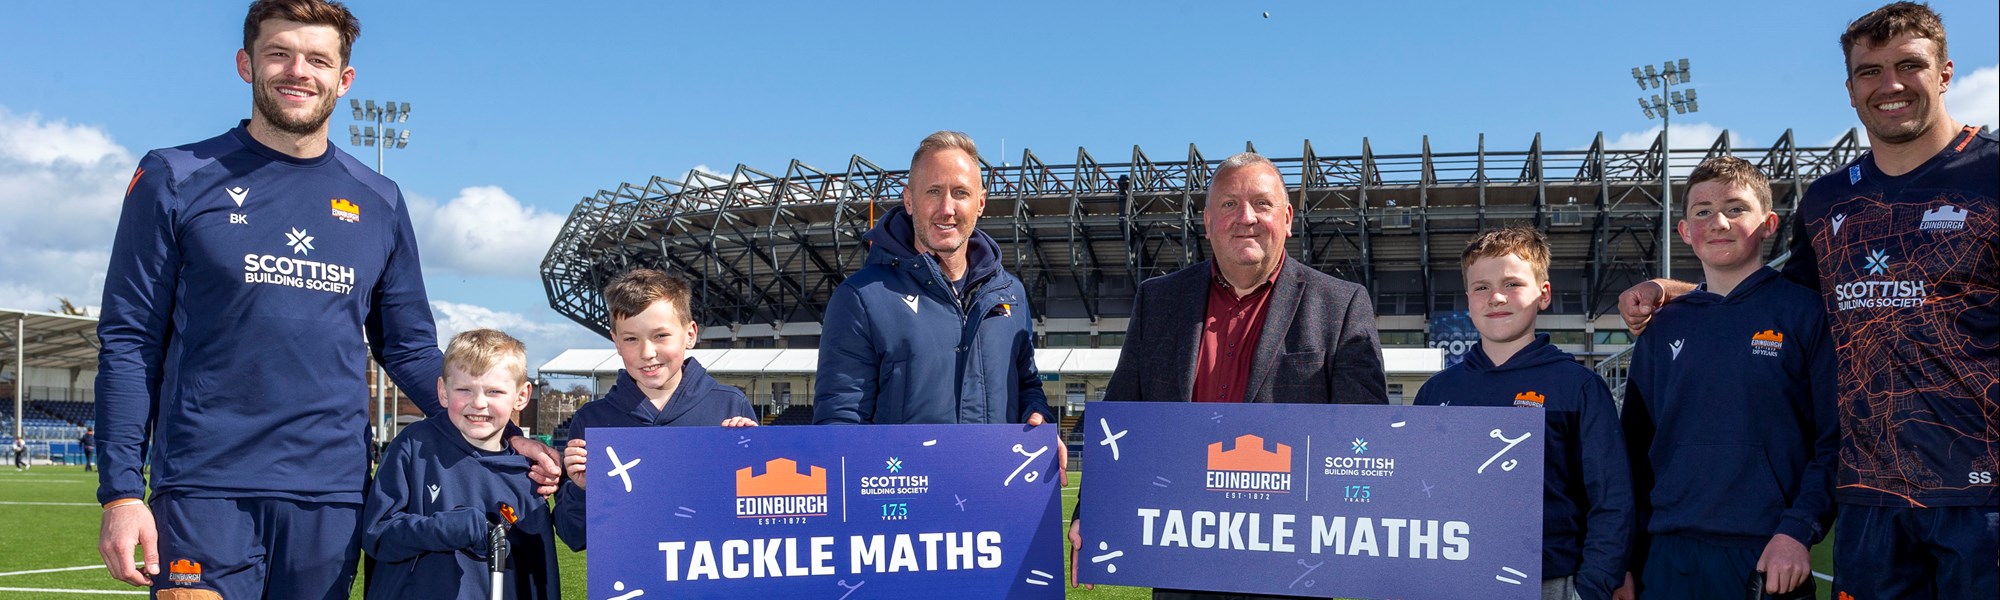 Background image: We've teamed up with Edinburgh Rugby to Tackle Maths 